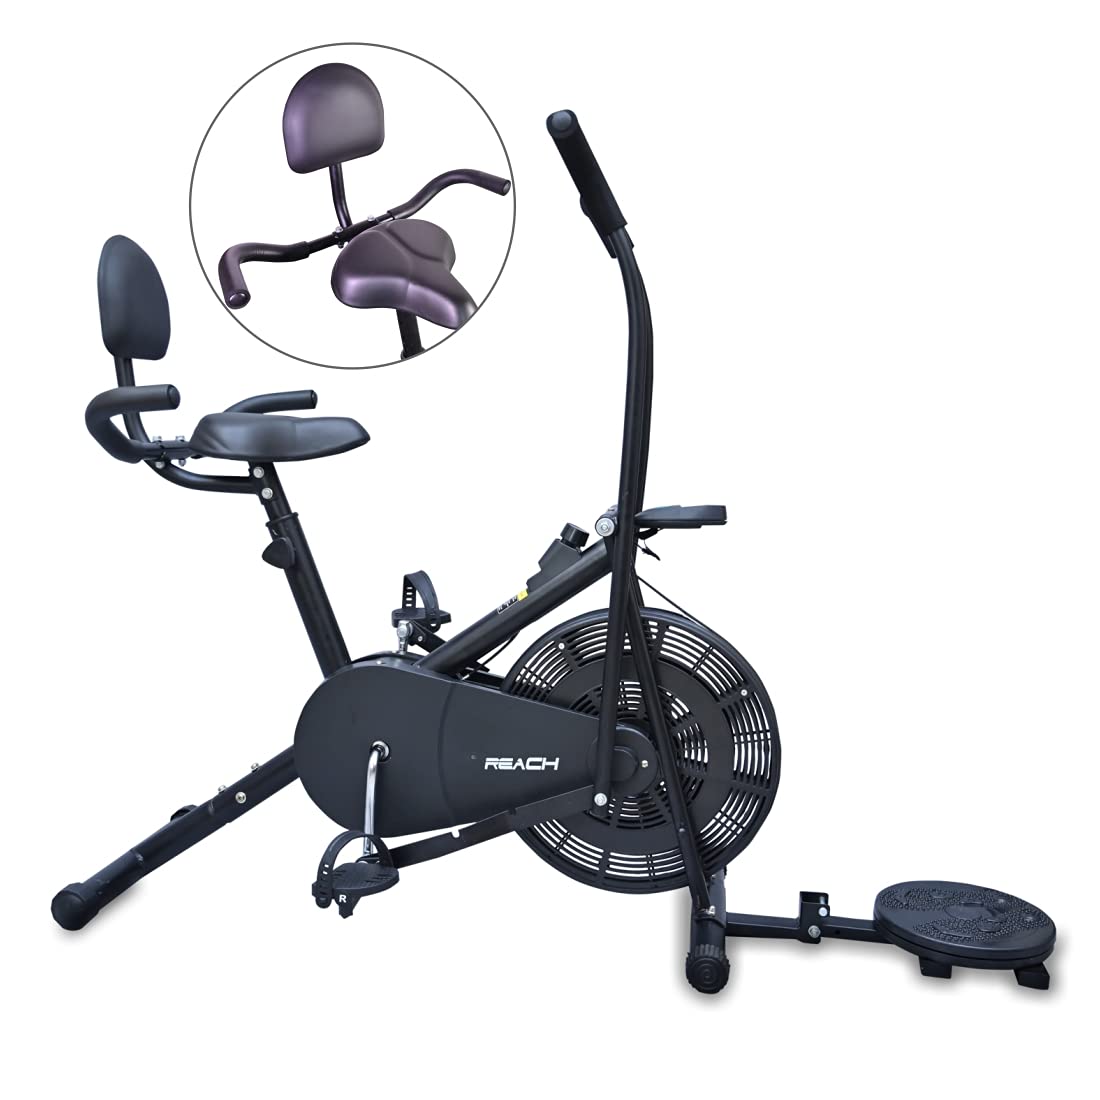 Reach AB-110BHT Air Bike Upright Exercise Cycle With Back Support Seat,Handles & Twister, Stationary Exercise Bike for Home Gym Best for Weight Loss